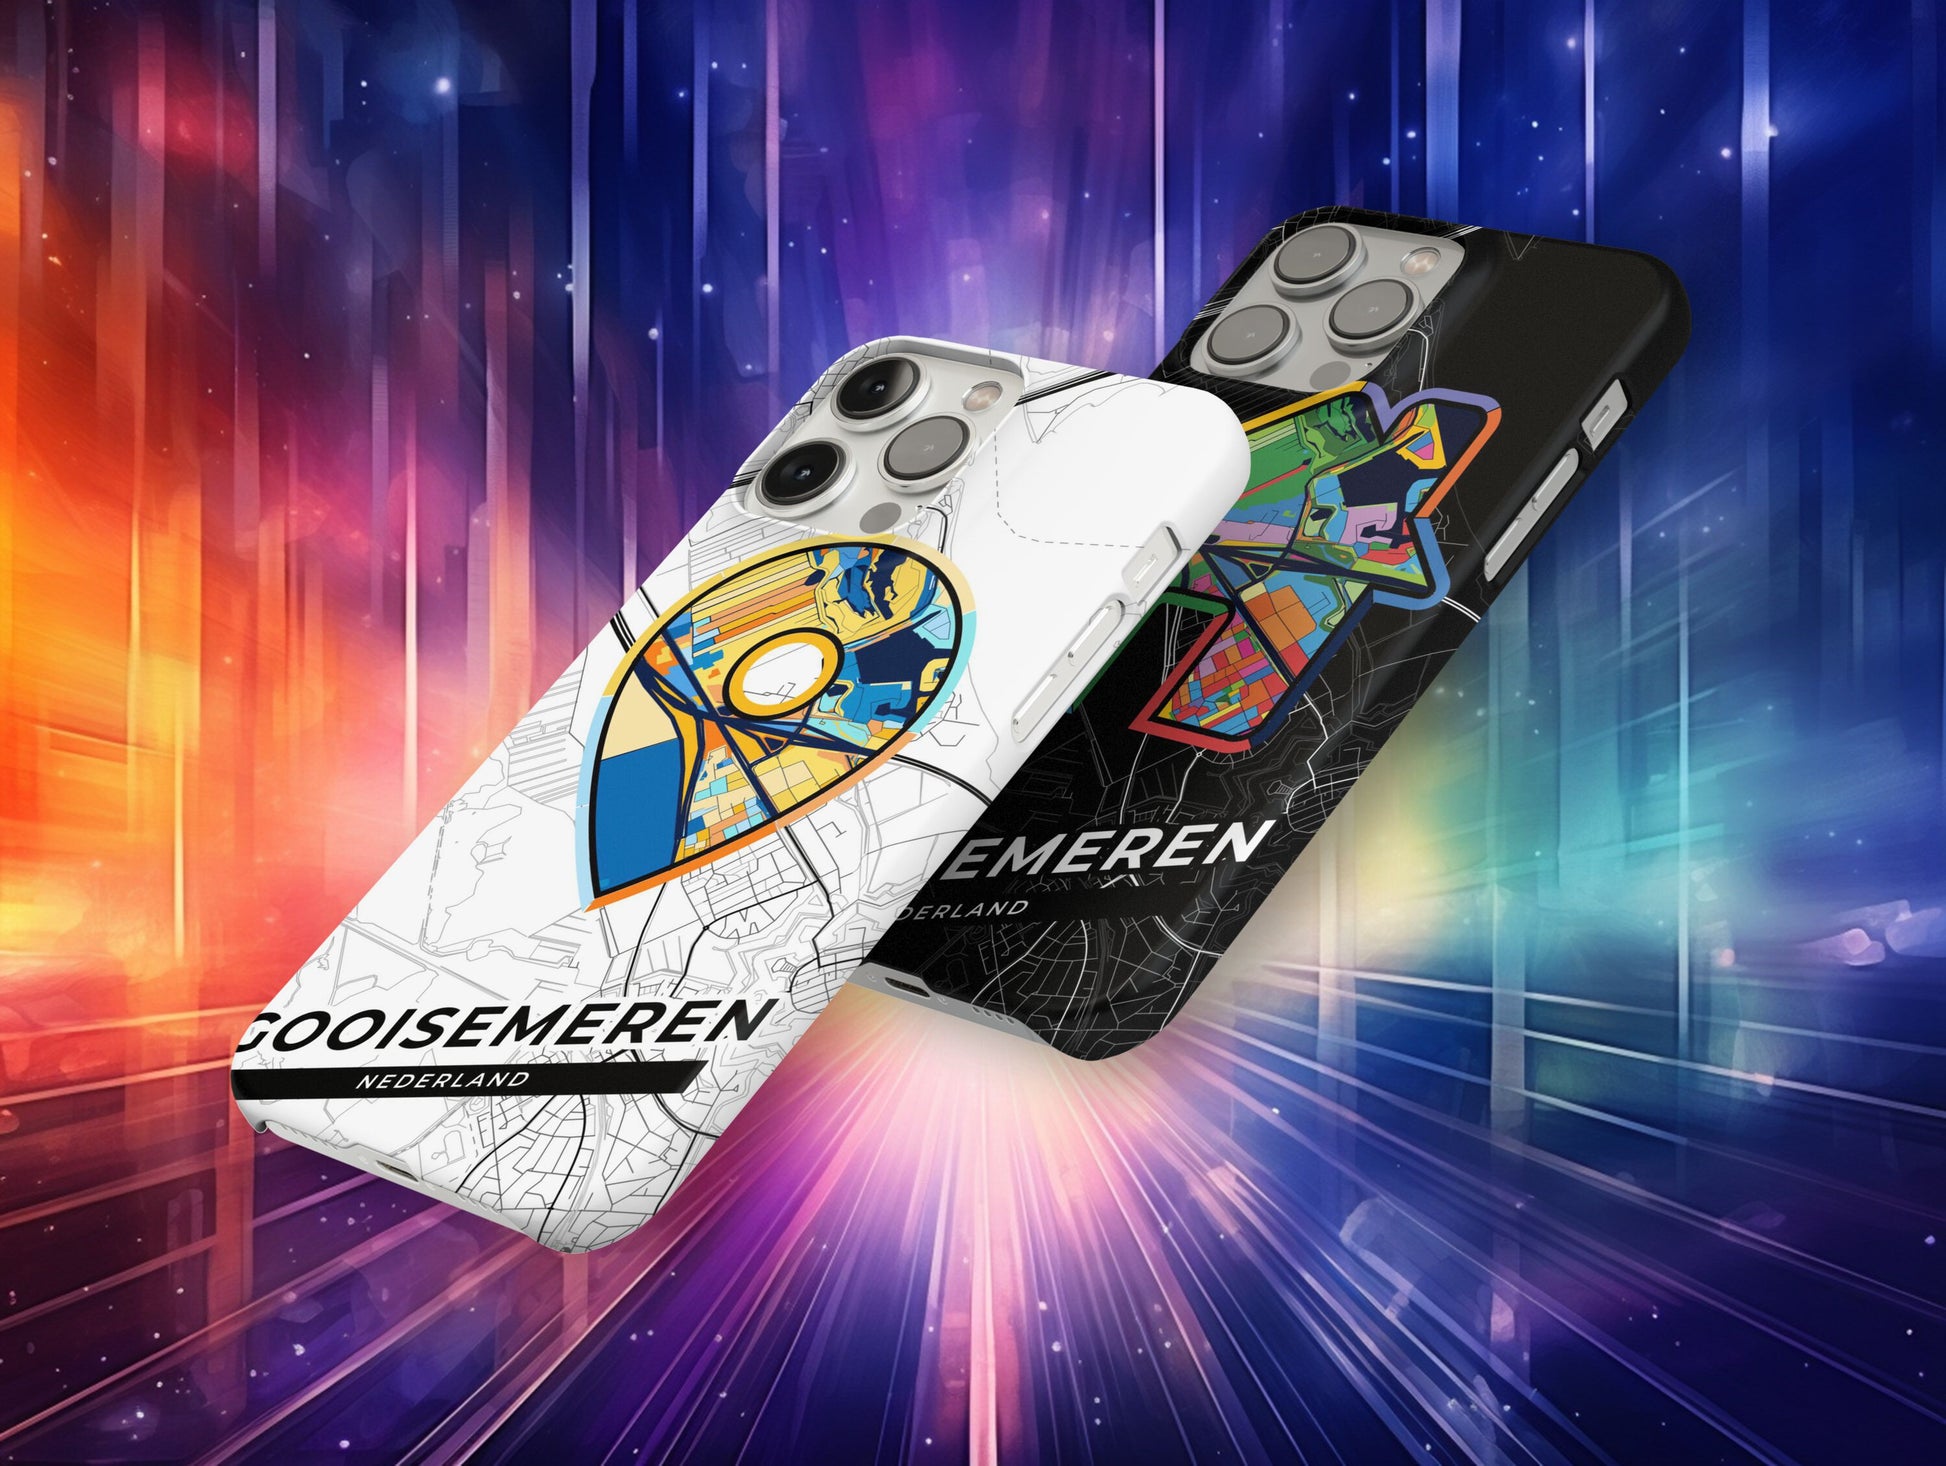 Gooise Meren Netherlands slim phone case with colorful icon. Birthday, wedding or housewarming gift. Couple match cases.